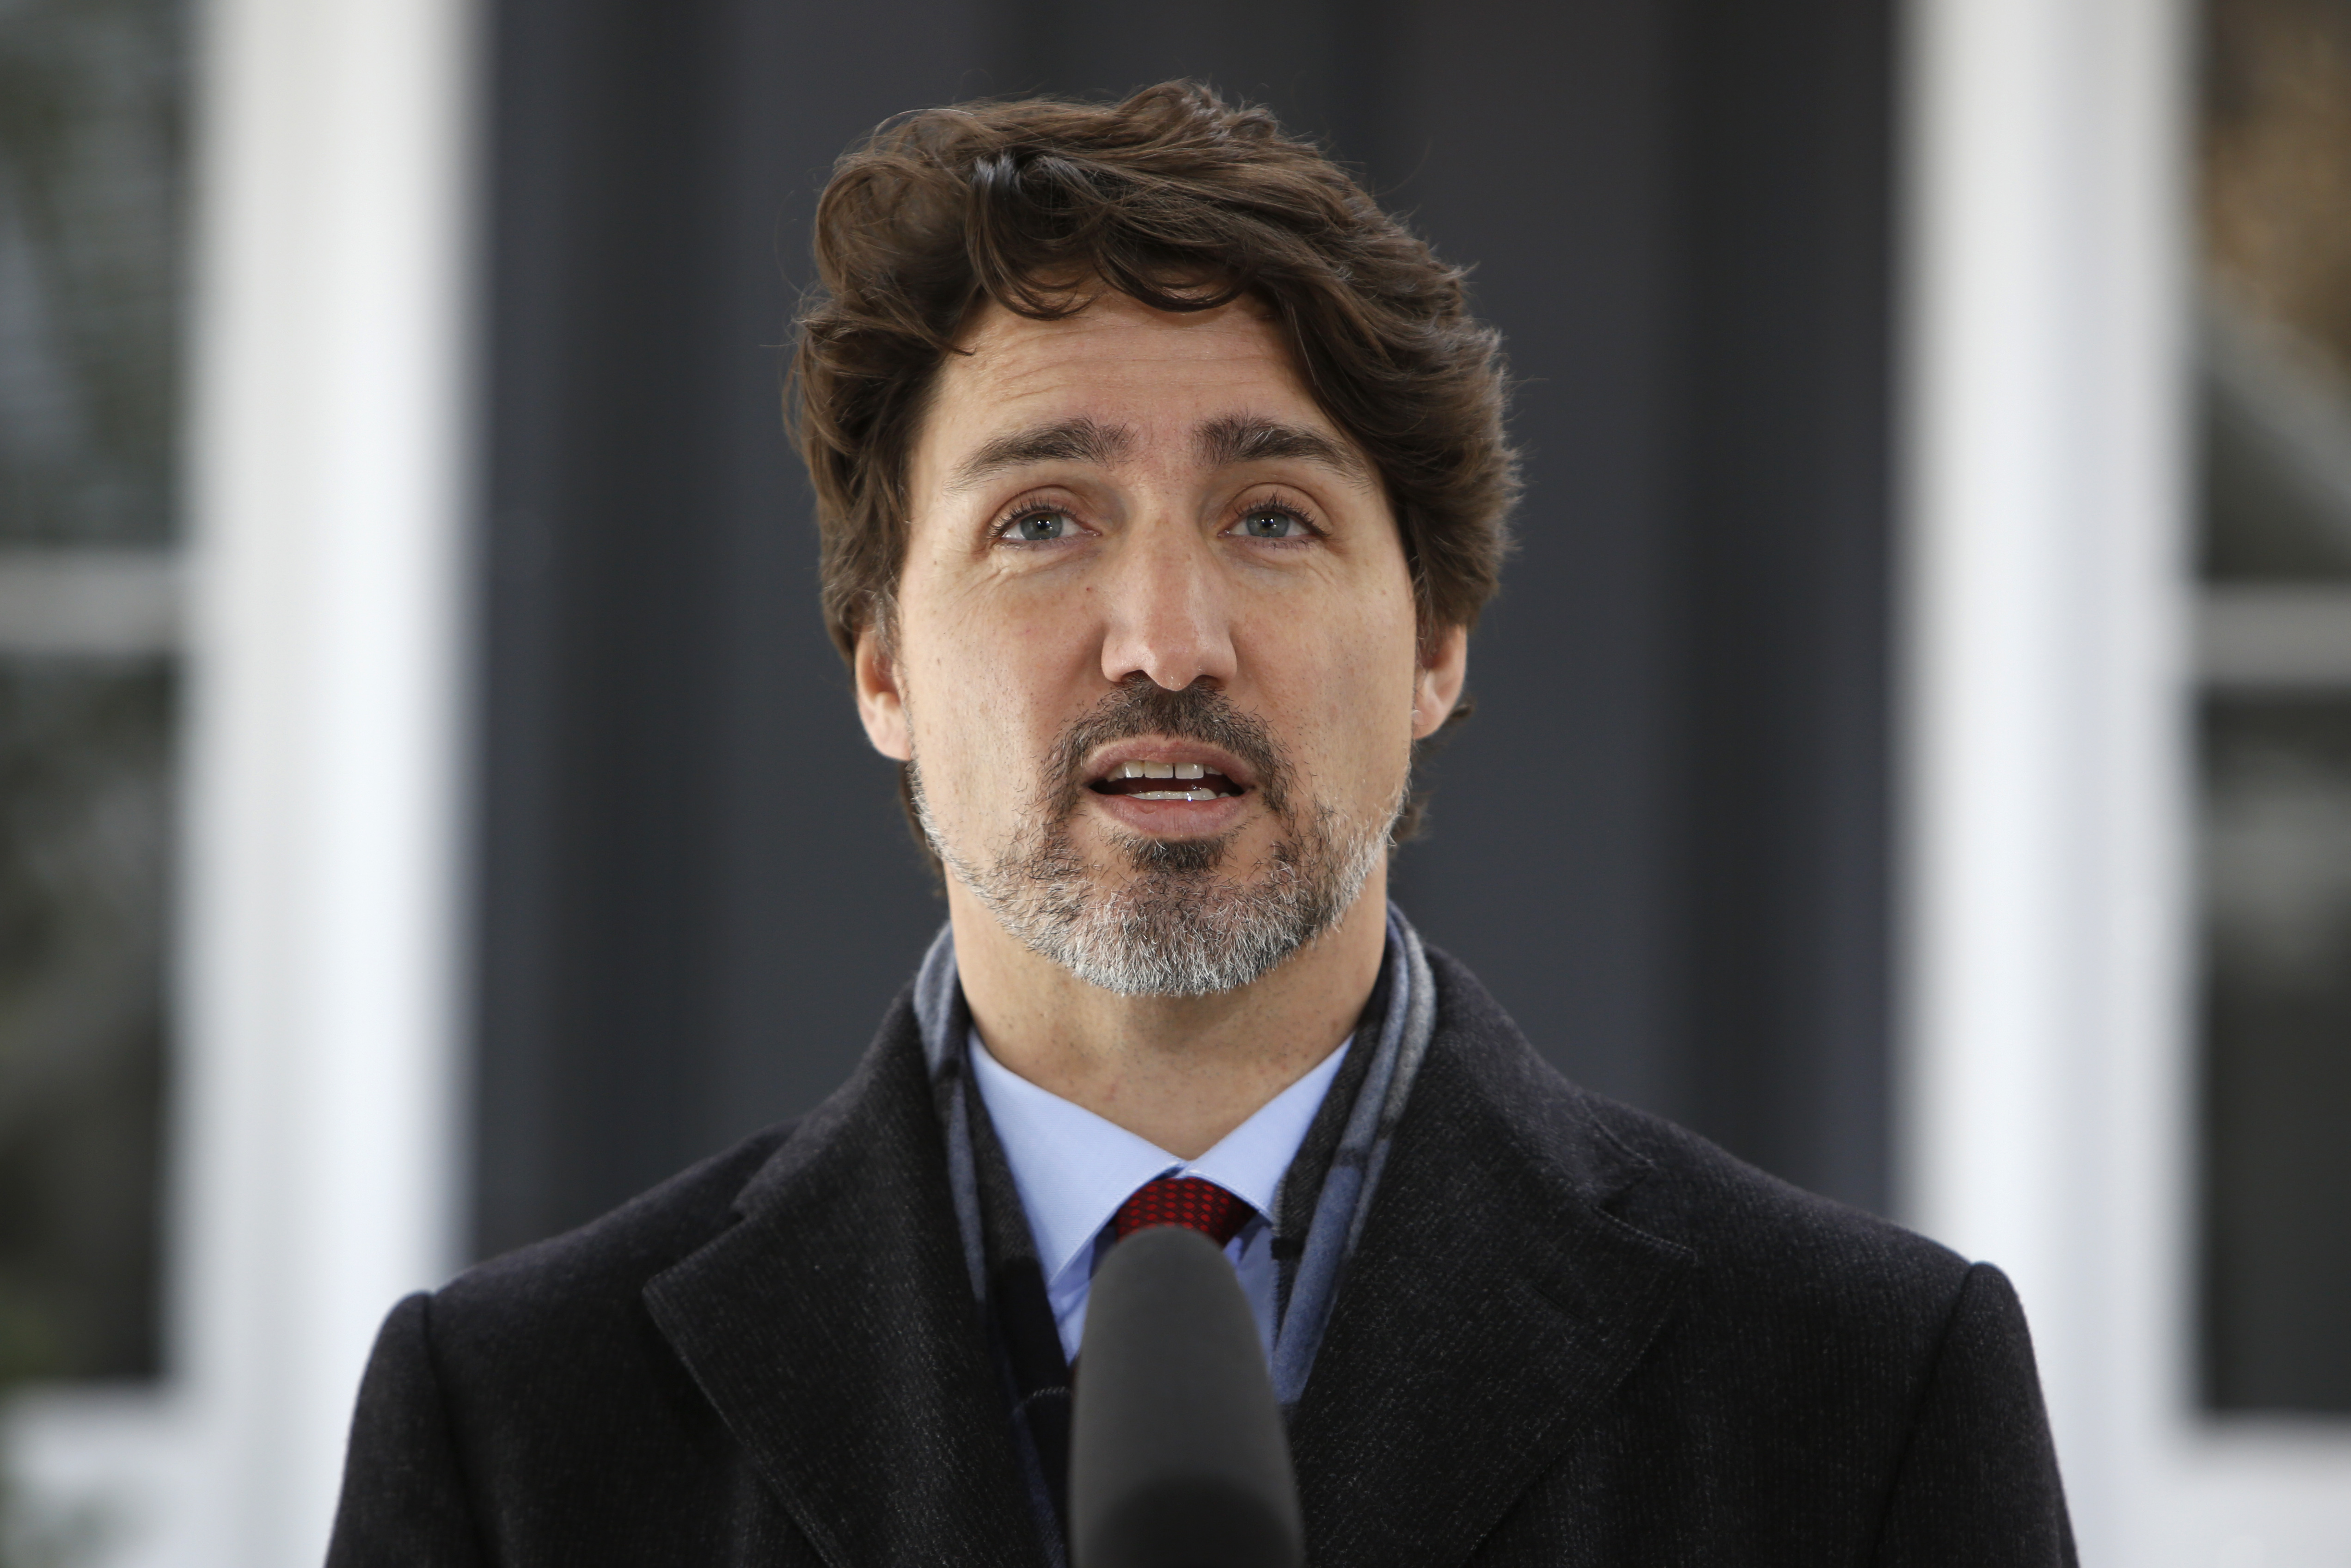 Justin Trudeau, Canada's prime minister, speaks during a news conference outside Rideau Cottage in Ottawa, Ontario, Canada, on Tuesday, April 14.